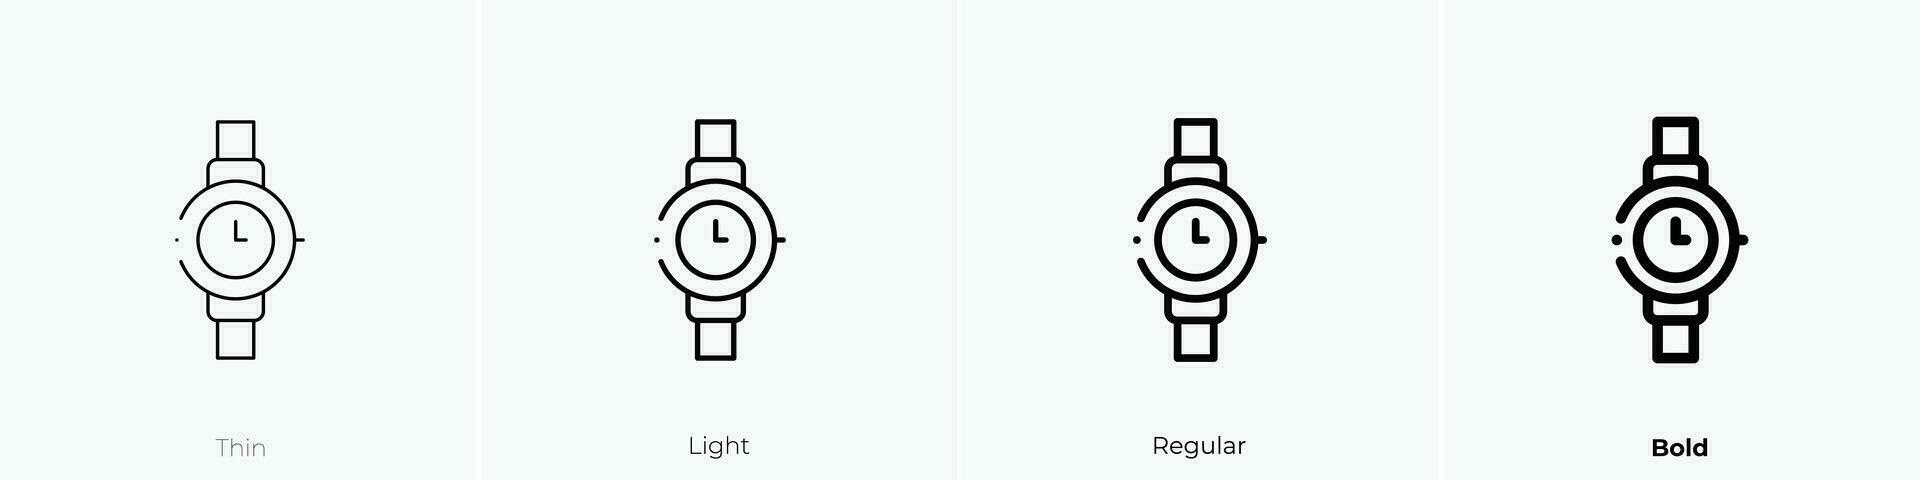 wristwatch icon. Thin, Light, Regular And Bold style design isolated on white background vector